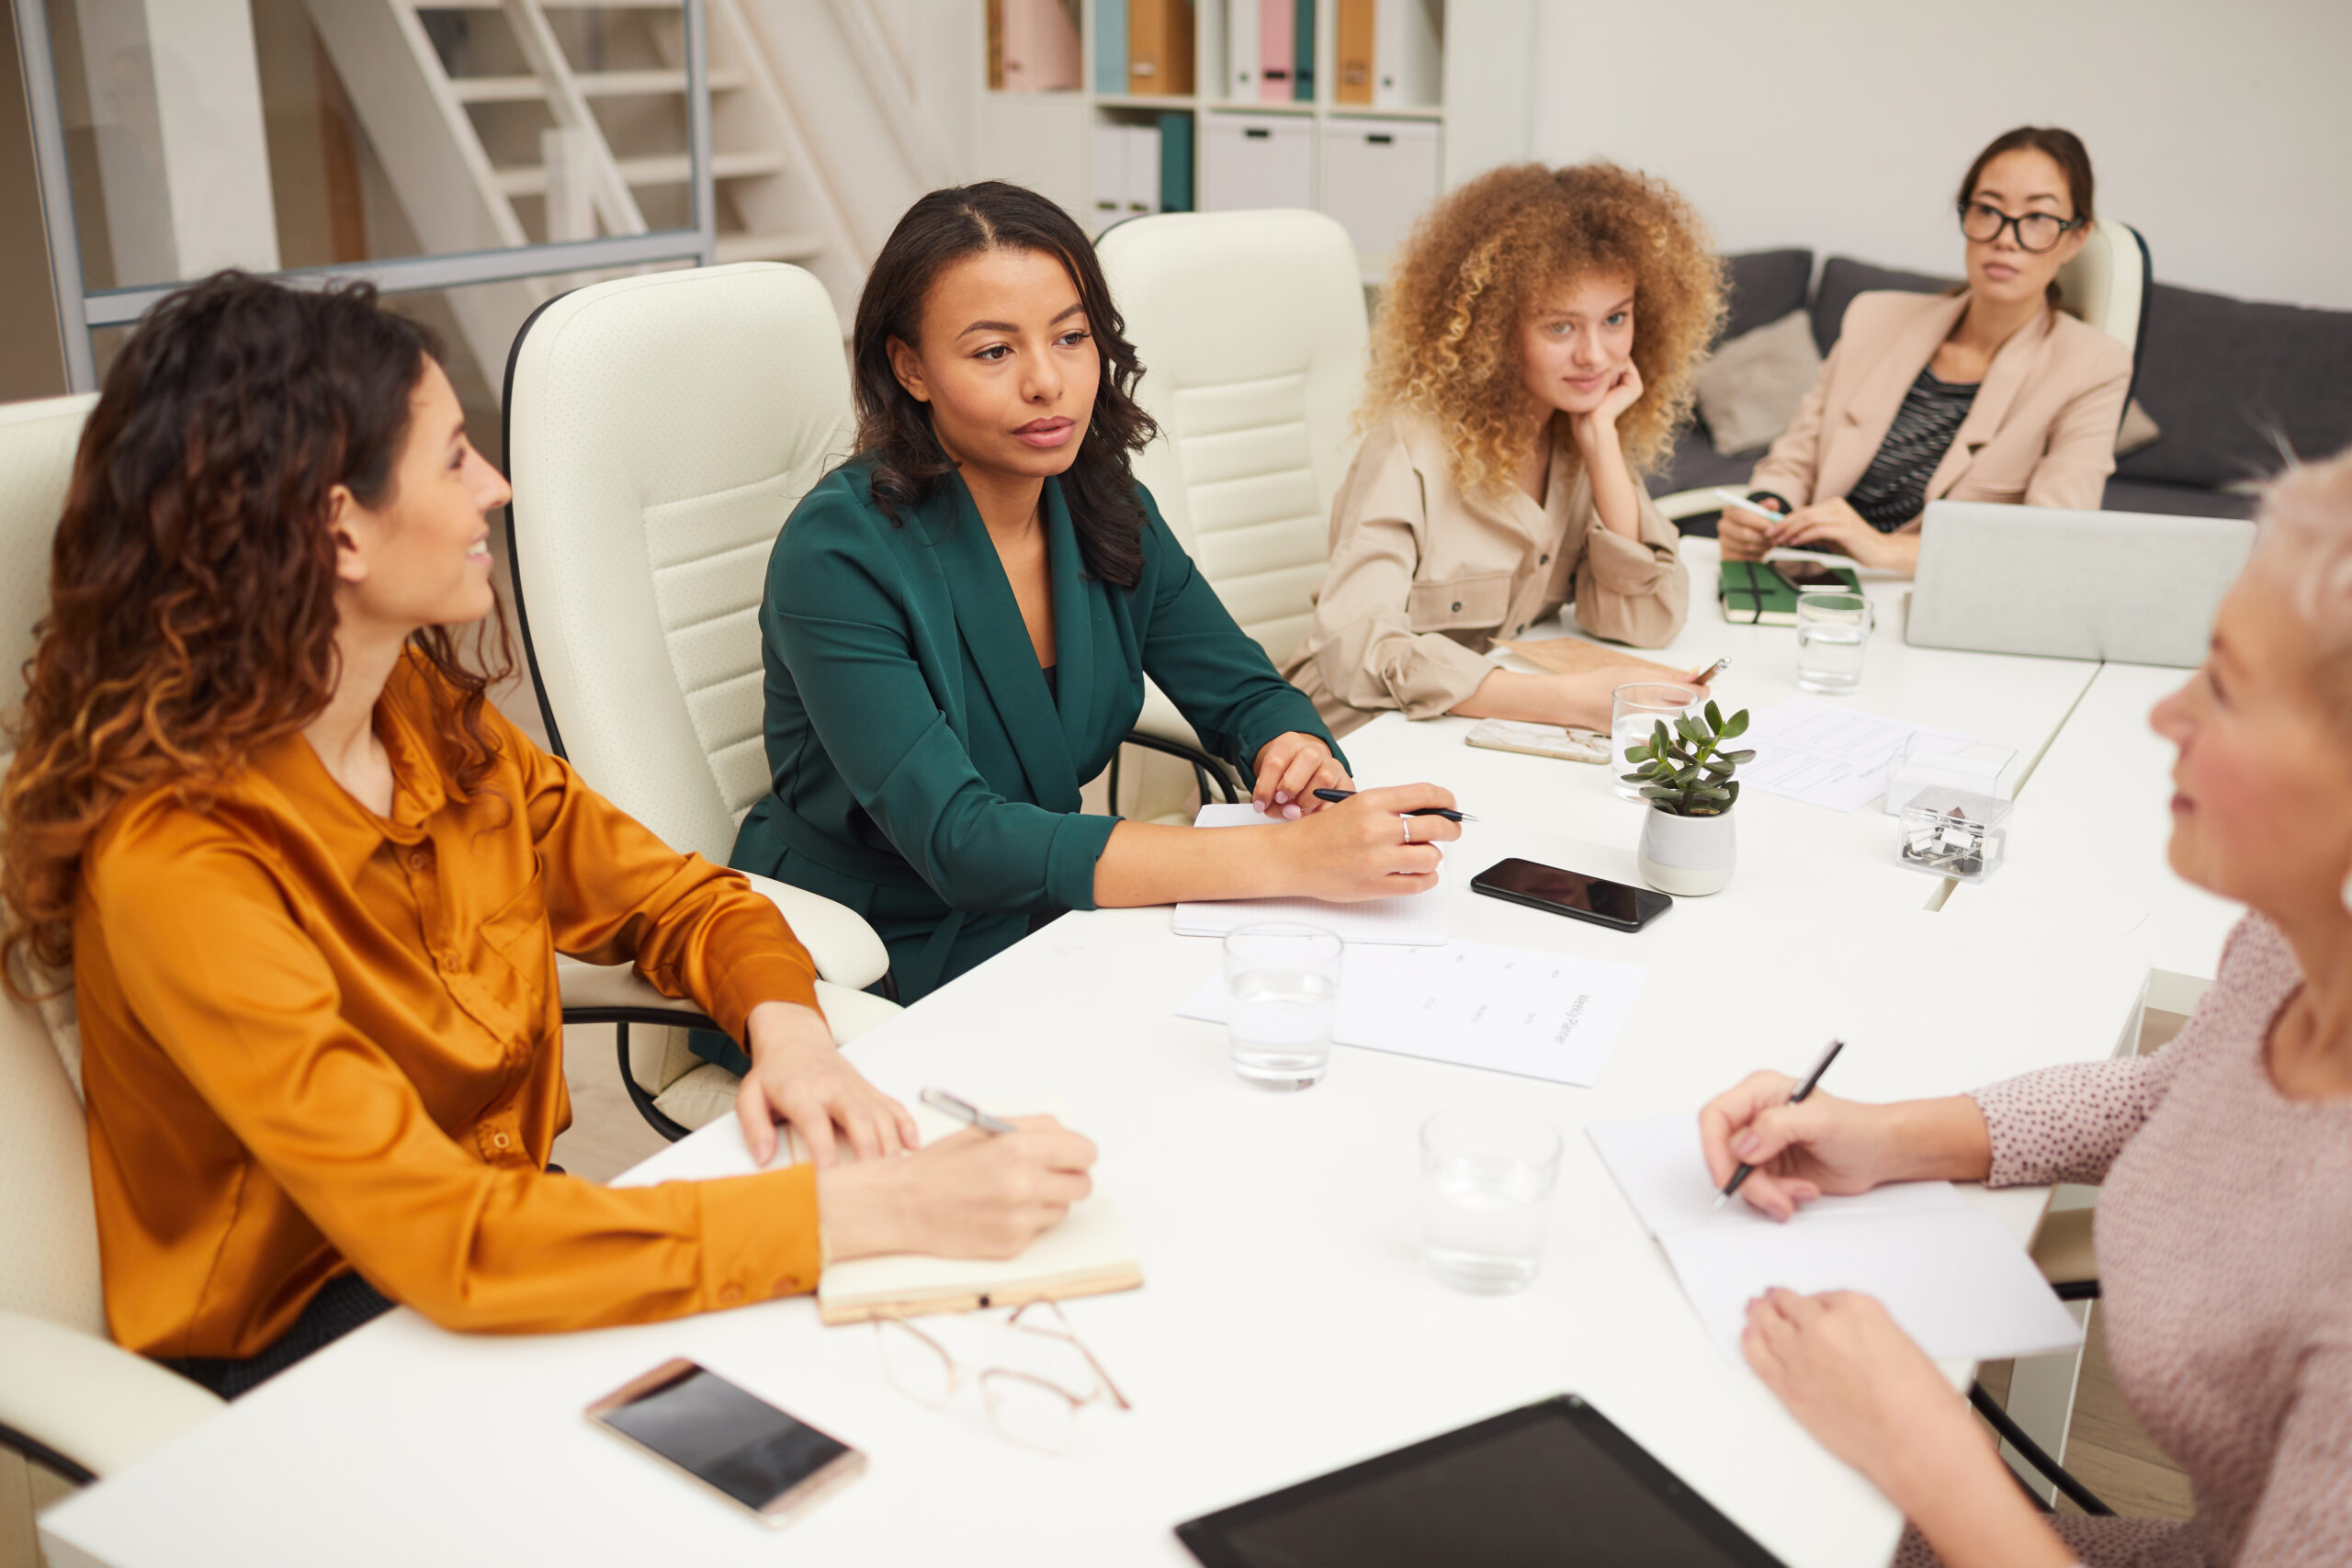 Group of businesswomen in a meeting